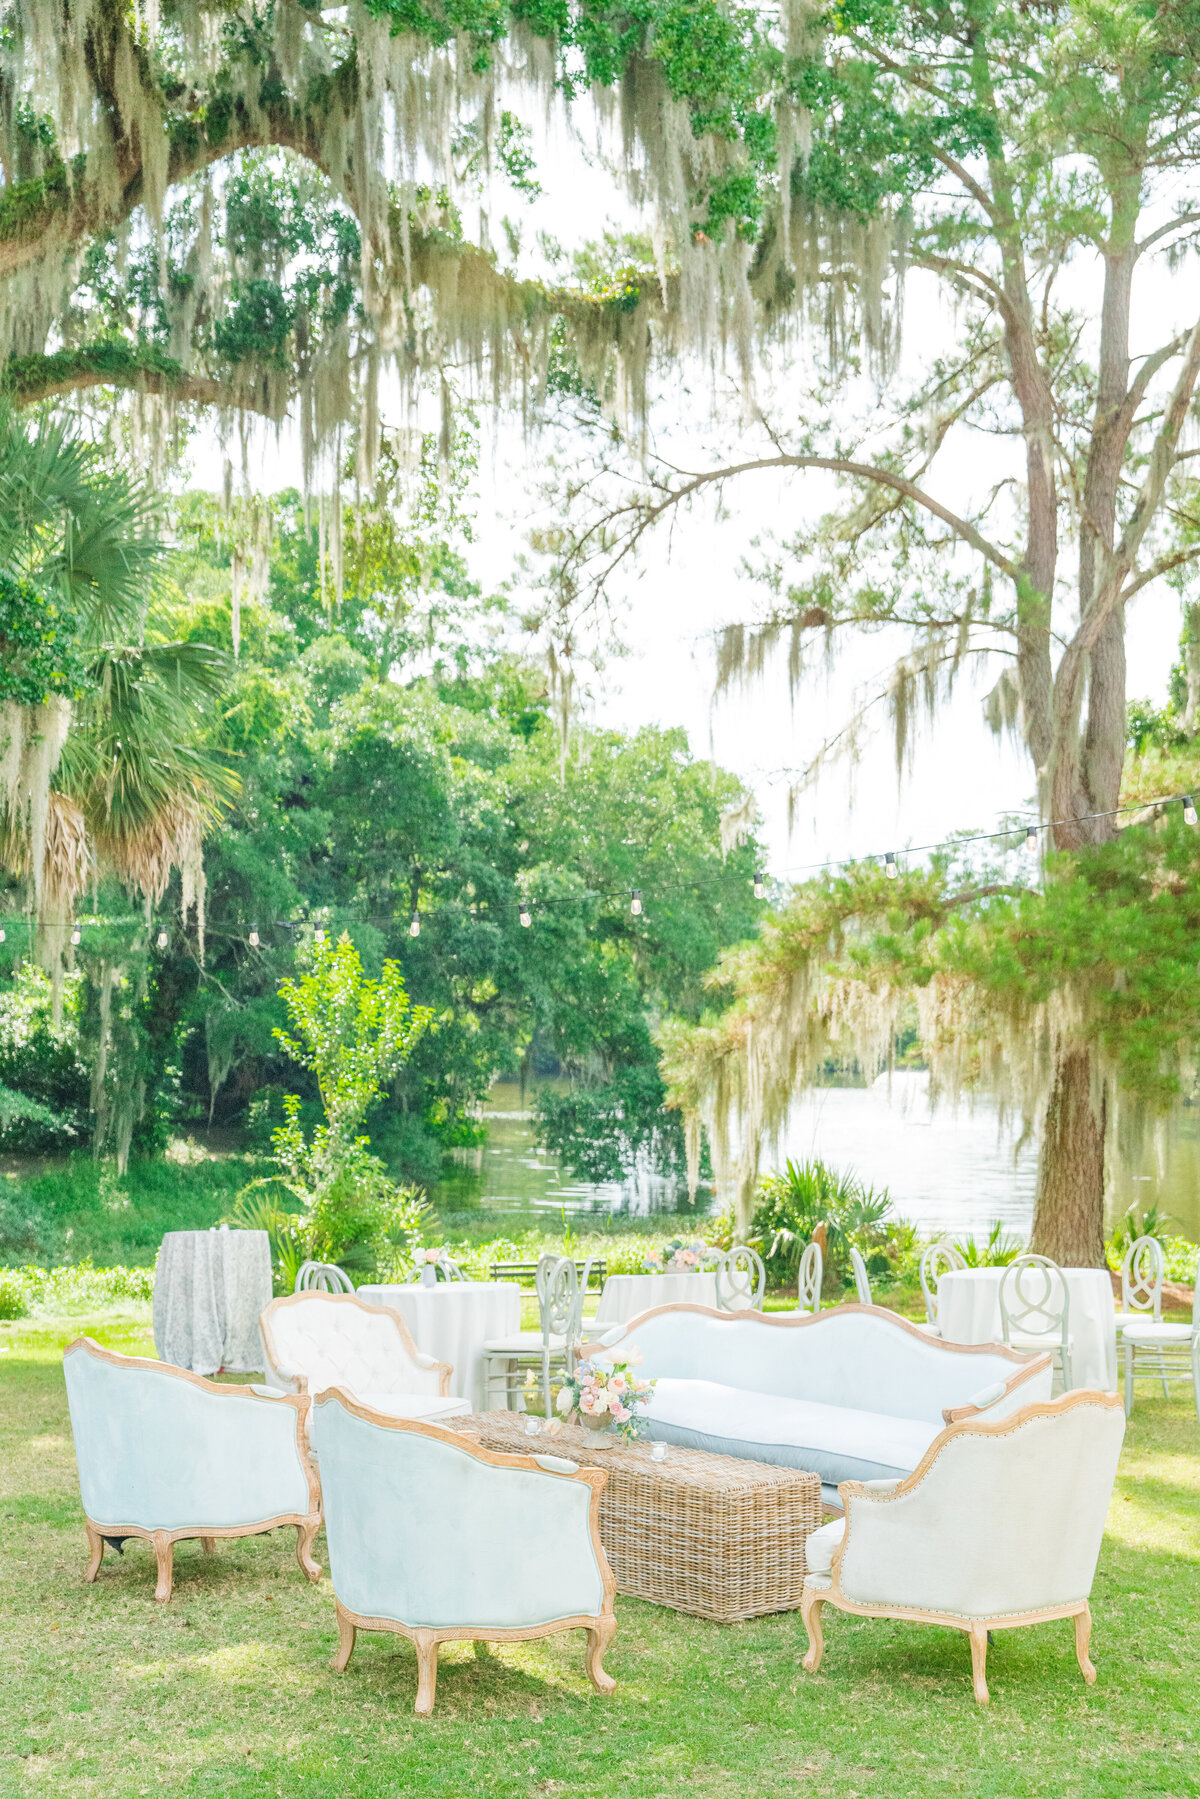 Outdoor space at a Legare Waring House wedding | Charleston wedding photographer Dana Cubbage